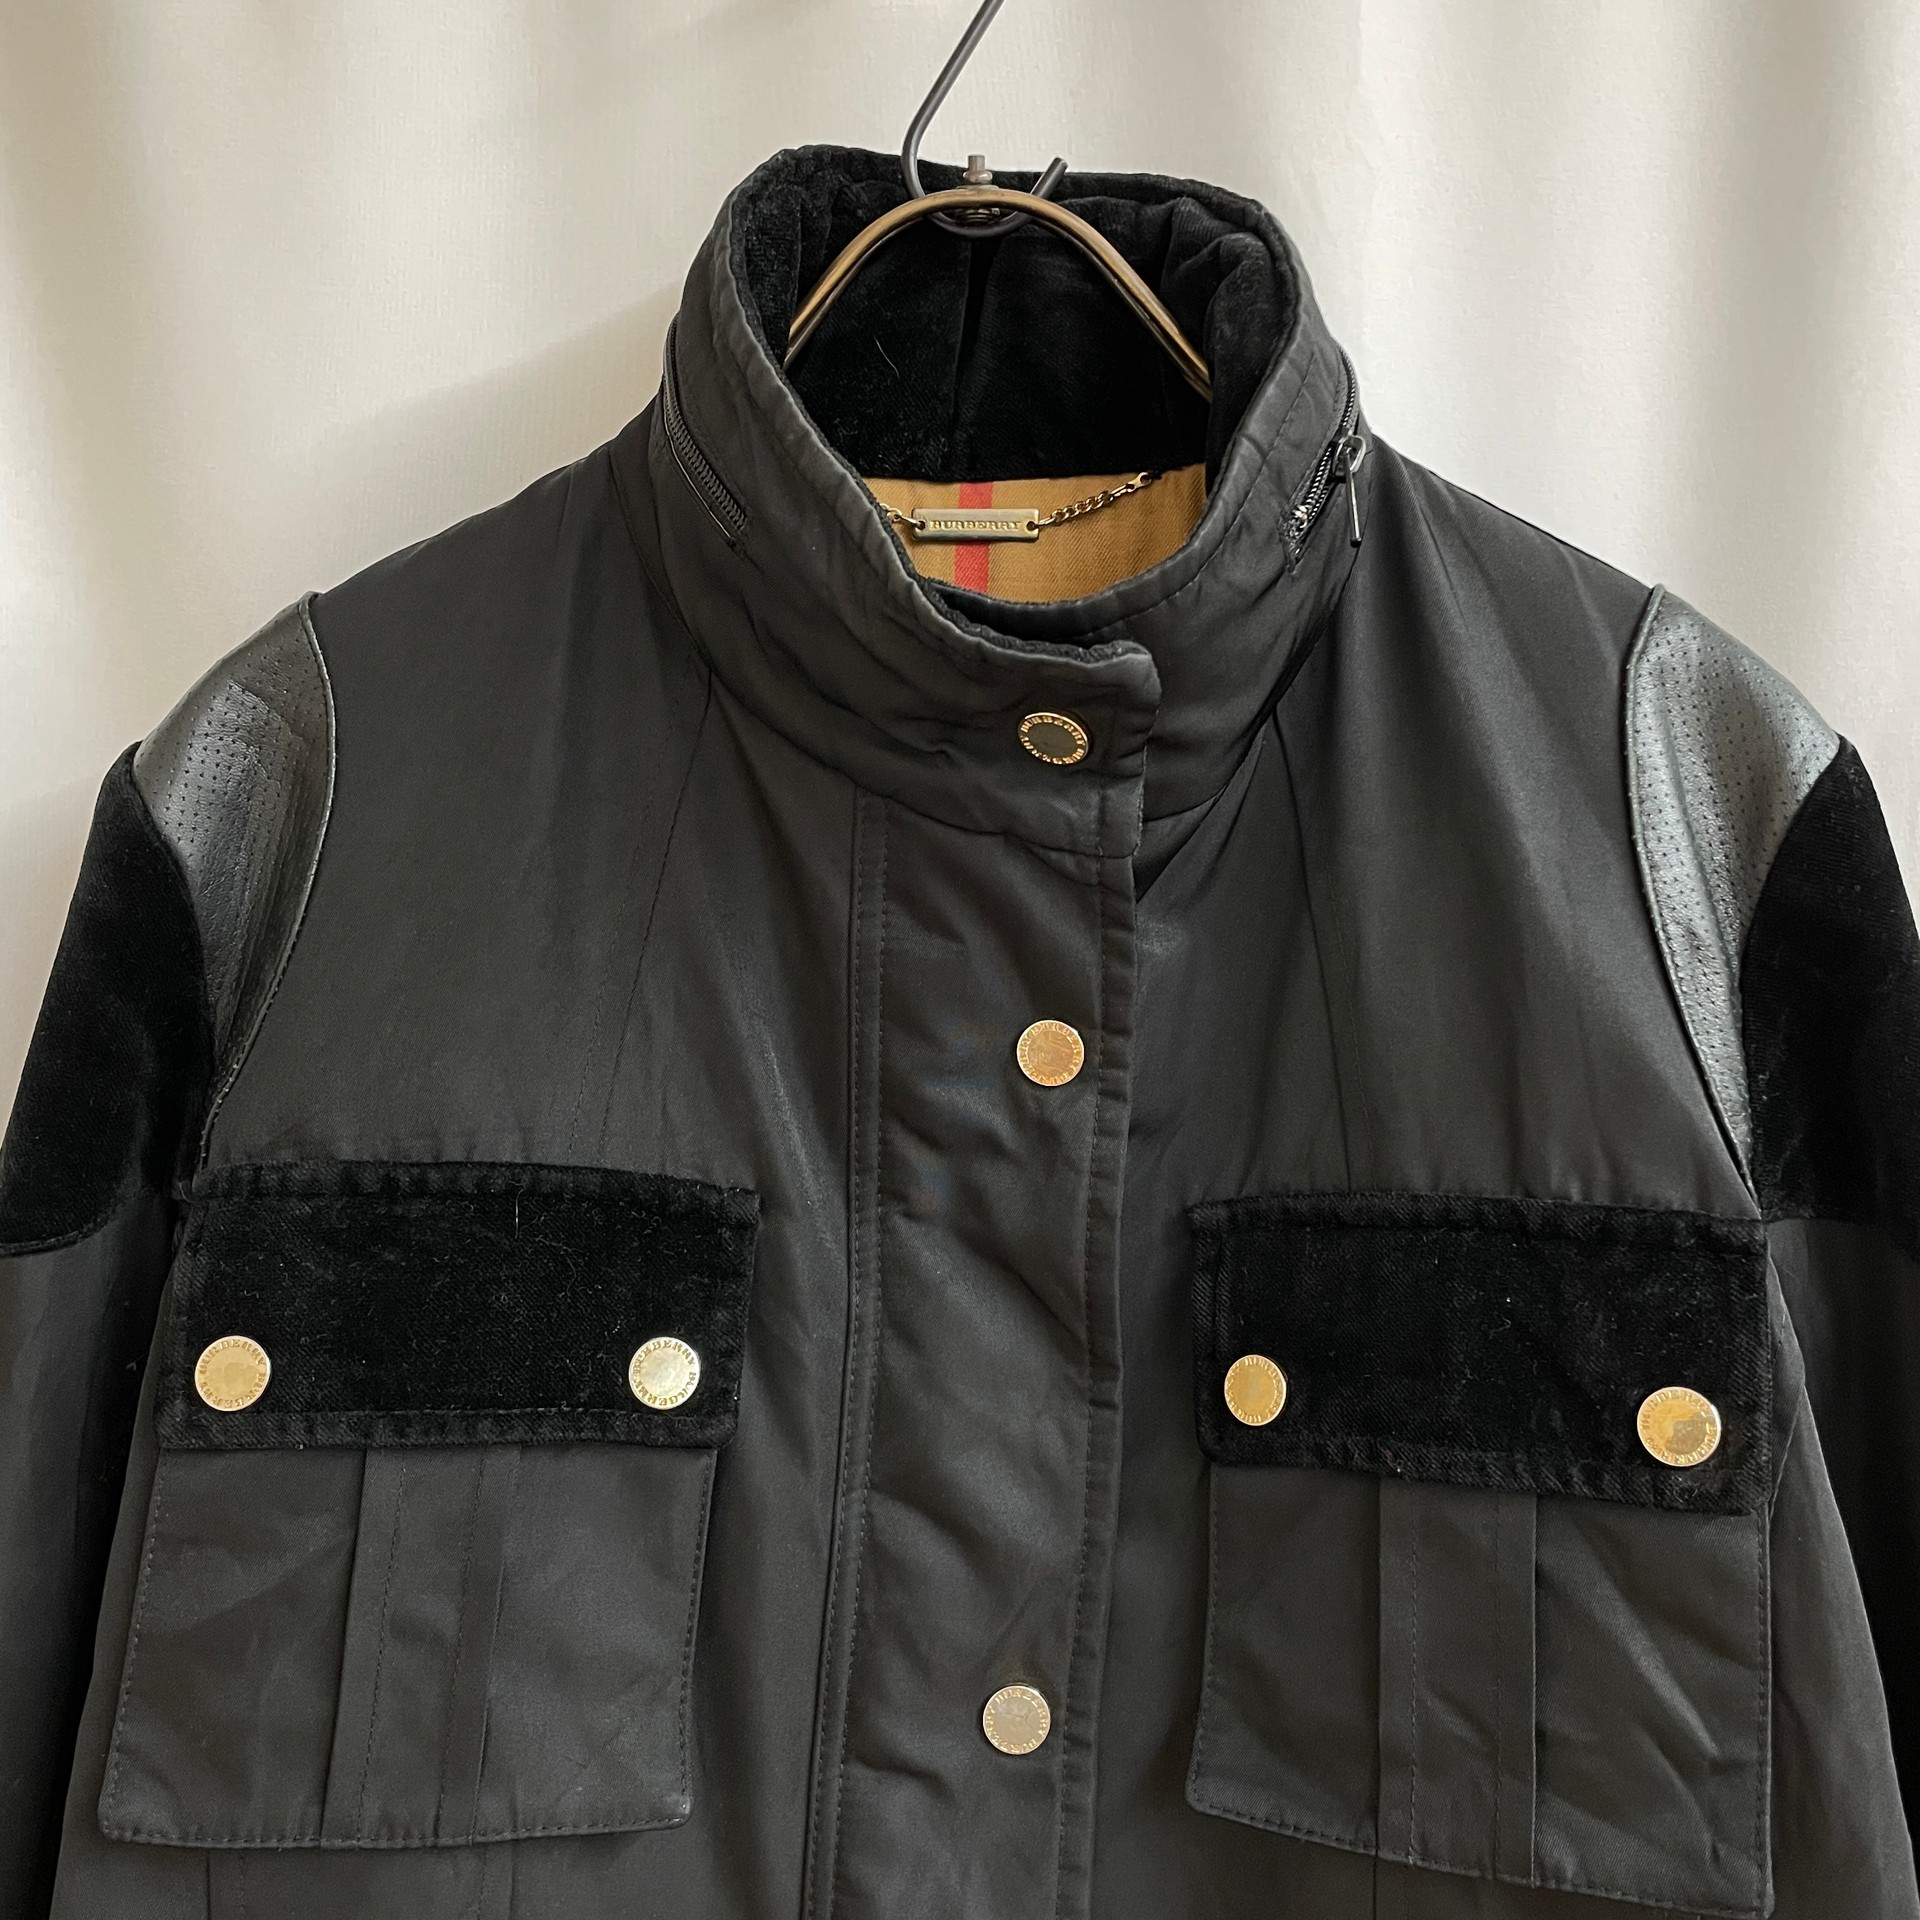 Burberry London made in Spain jacket | Vintage.City